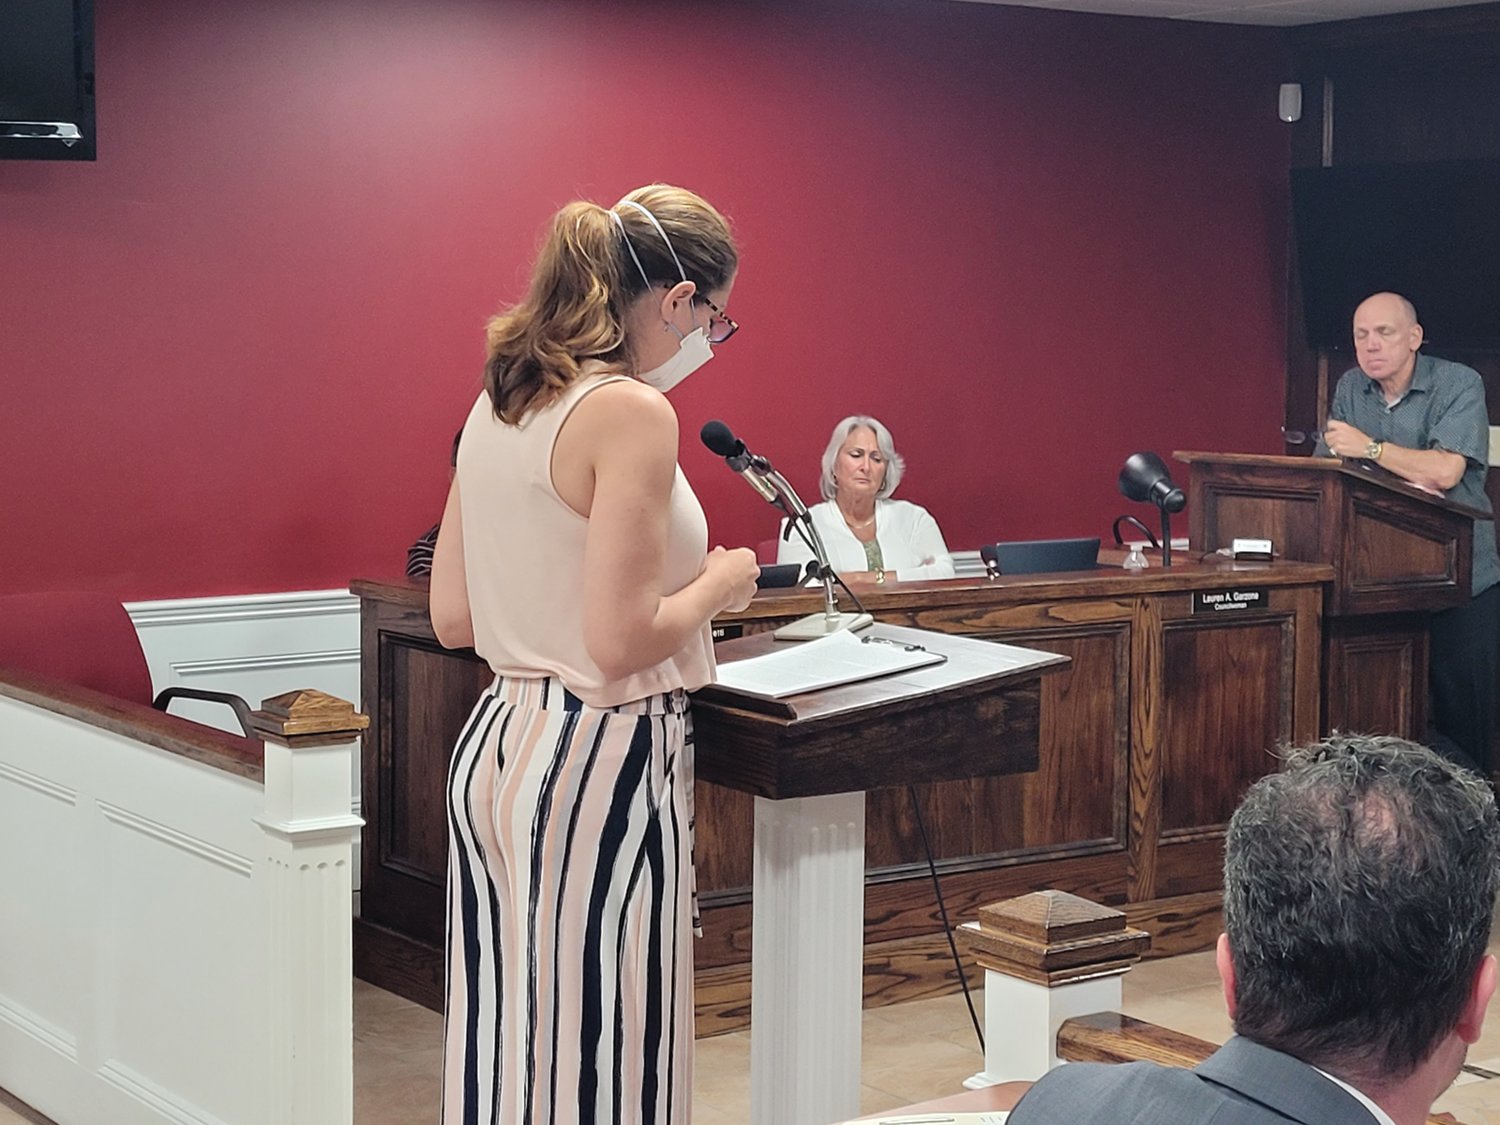 QUESTIONS POSED: Johnston resident Amy Dixon addressed the Town Council Tuesday night, asking questions about ‘Project Schooner,’ the new Amazon distribution facility proposed for a wooded location near the intersection of routes 6 and 295.